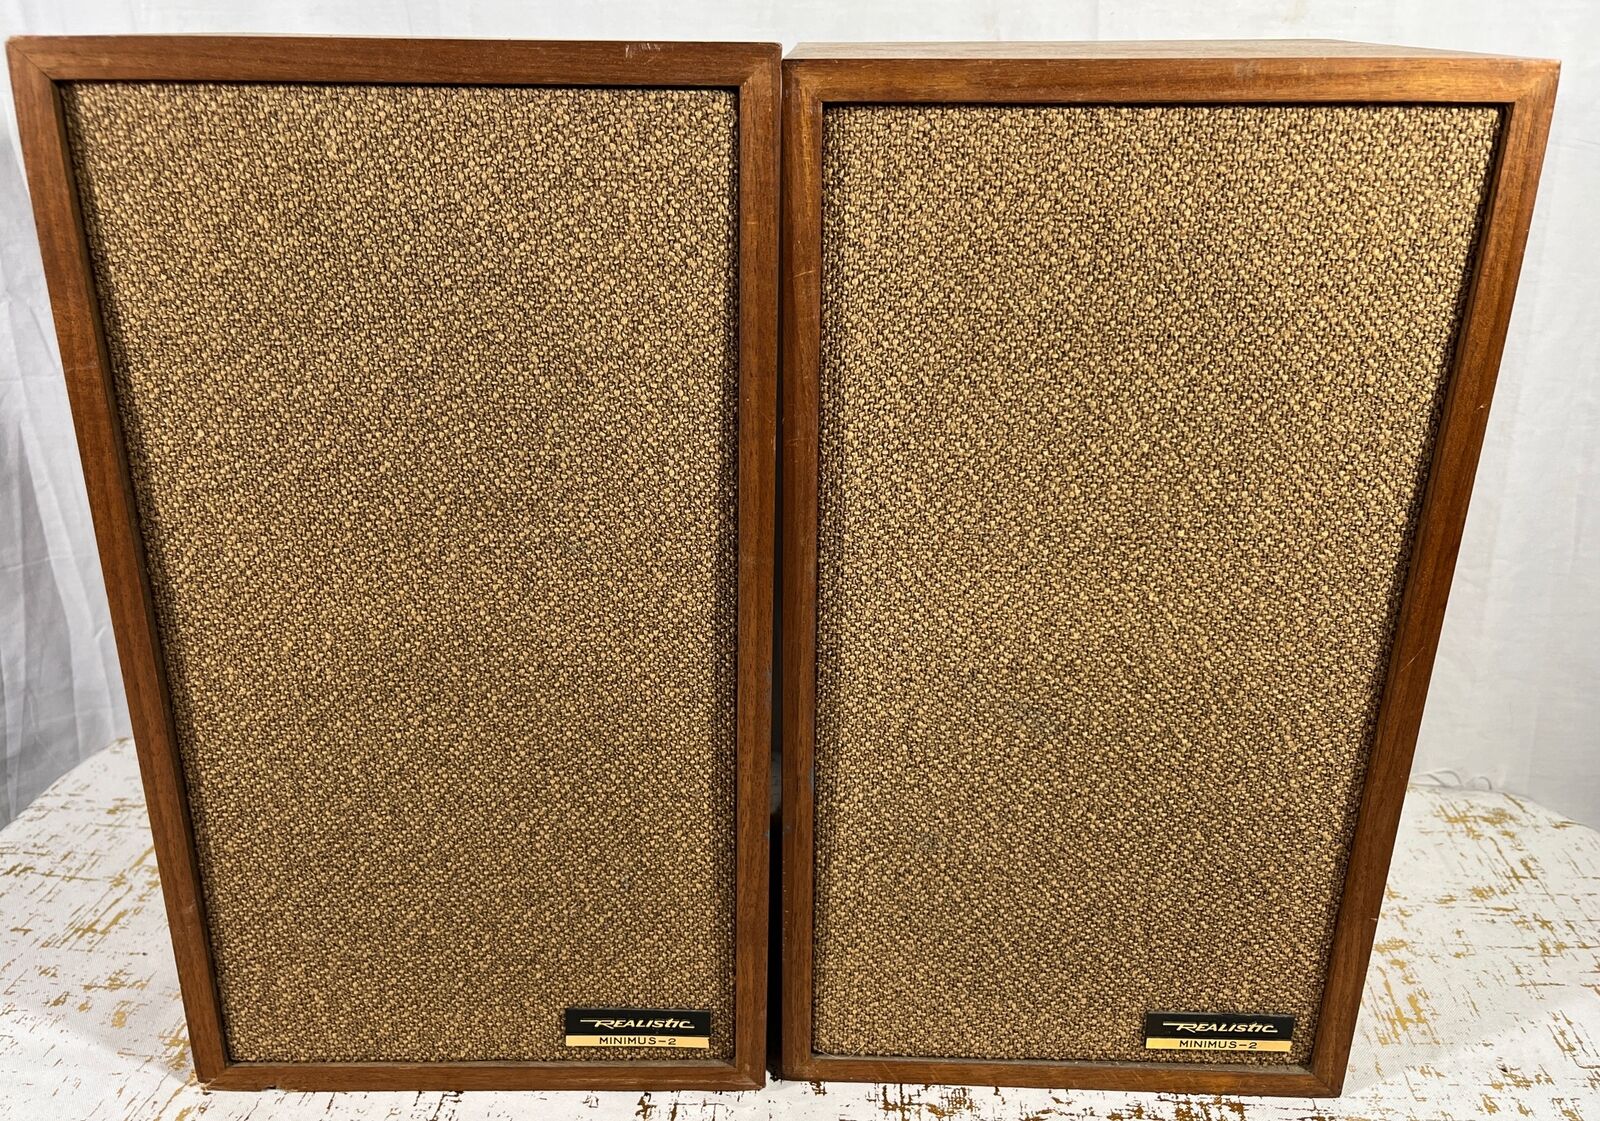 Set Of 2 Realistic Minimums-2 2 Way Compact Speakers Radio Shack #40-1968A VTG